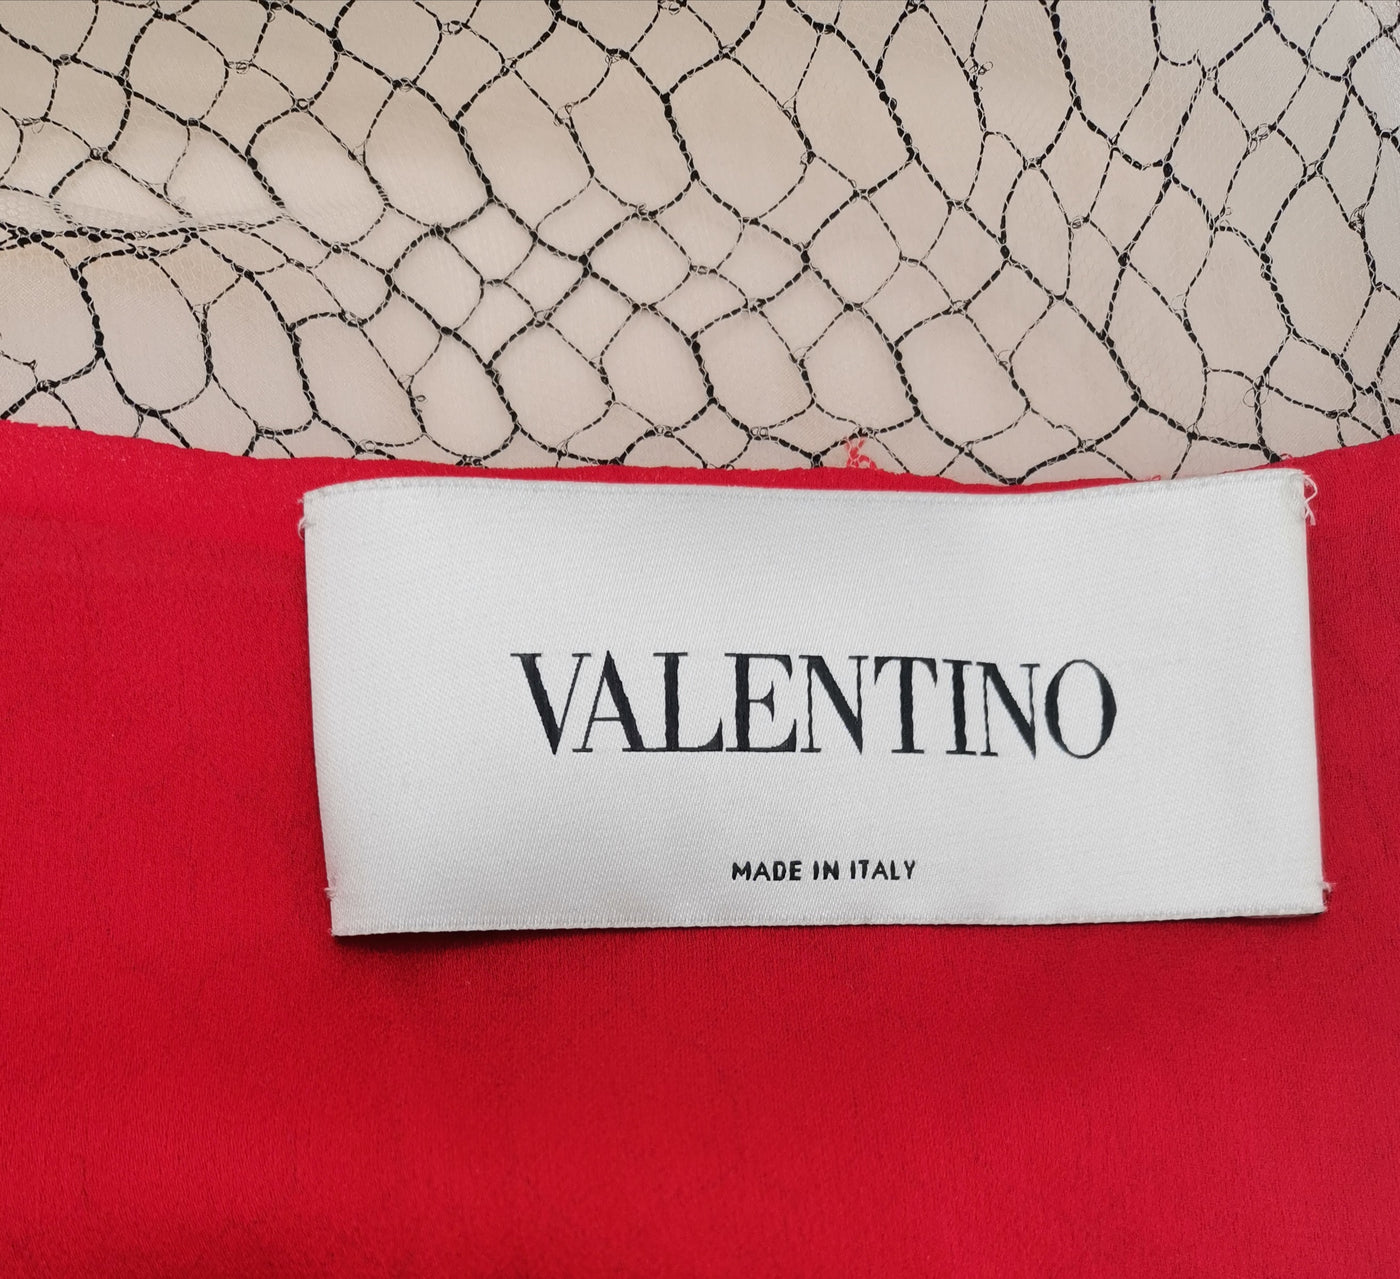 VALENTINO red ruffles and lace dress